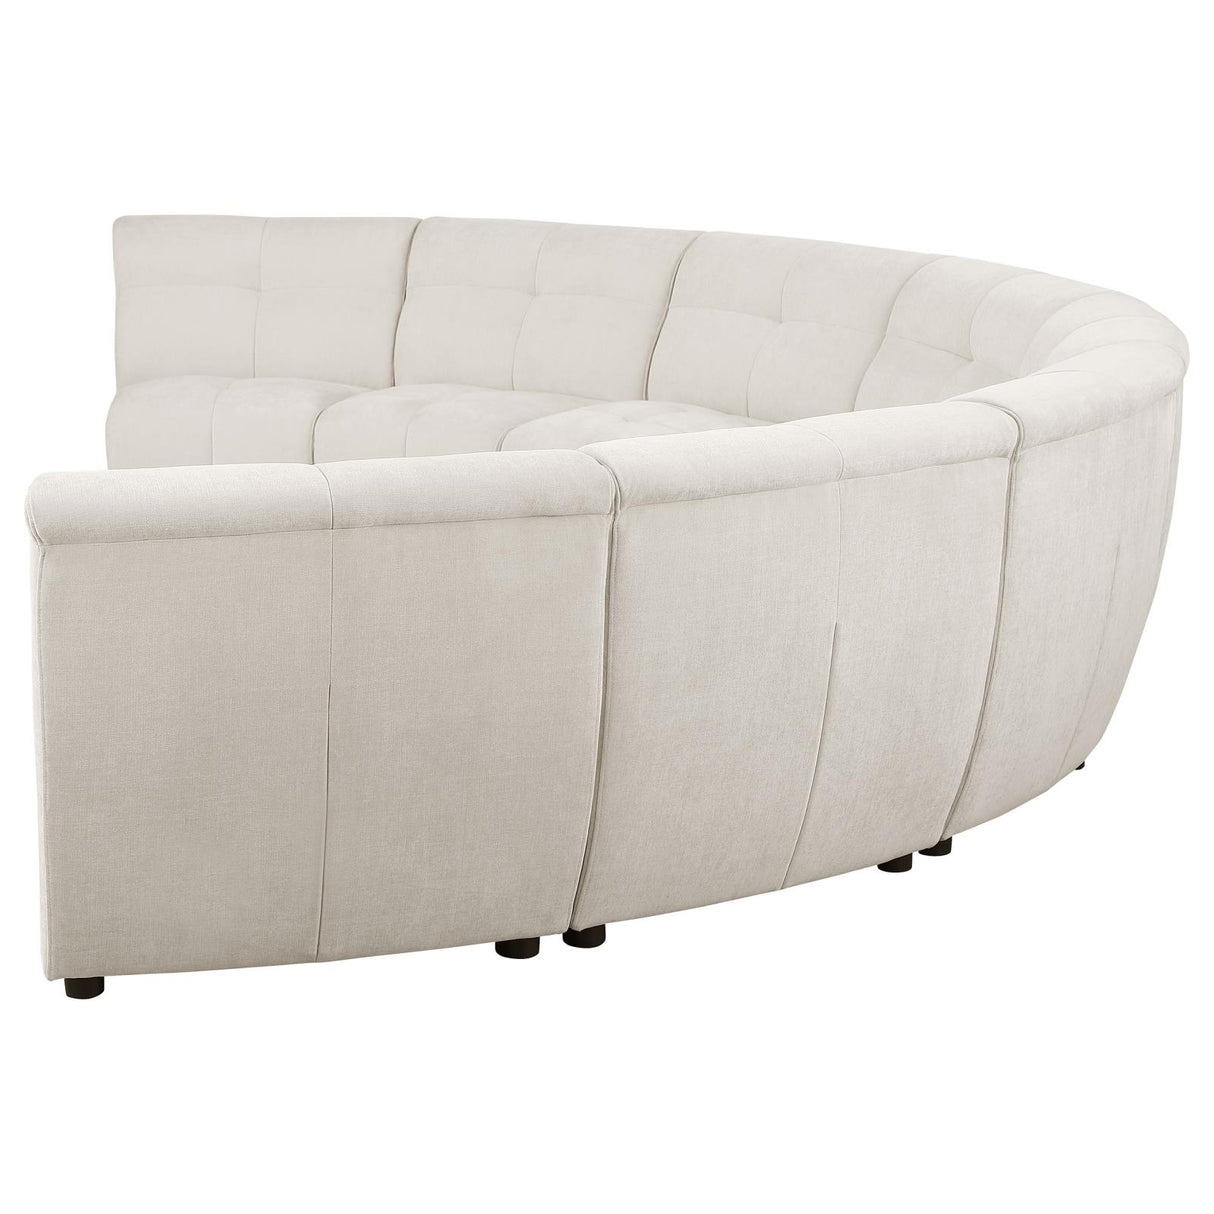 Charlotte 8-piece Upholstered Curved Modular Sectional Sofa Ivory - 551300 - Luna Furniture